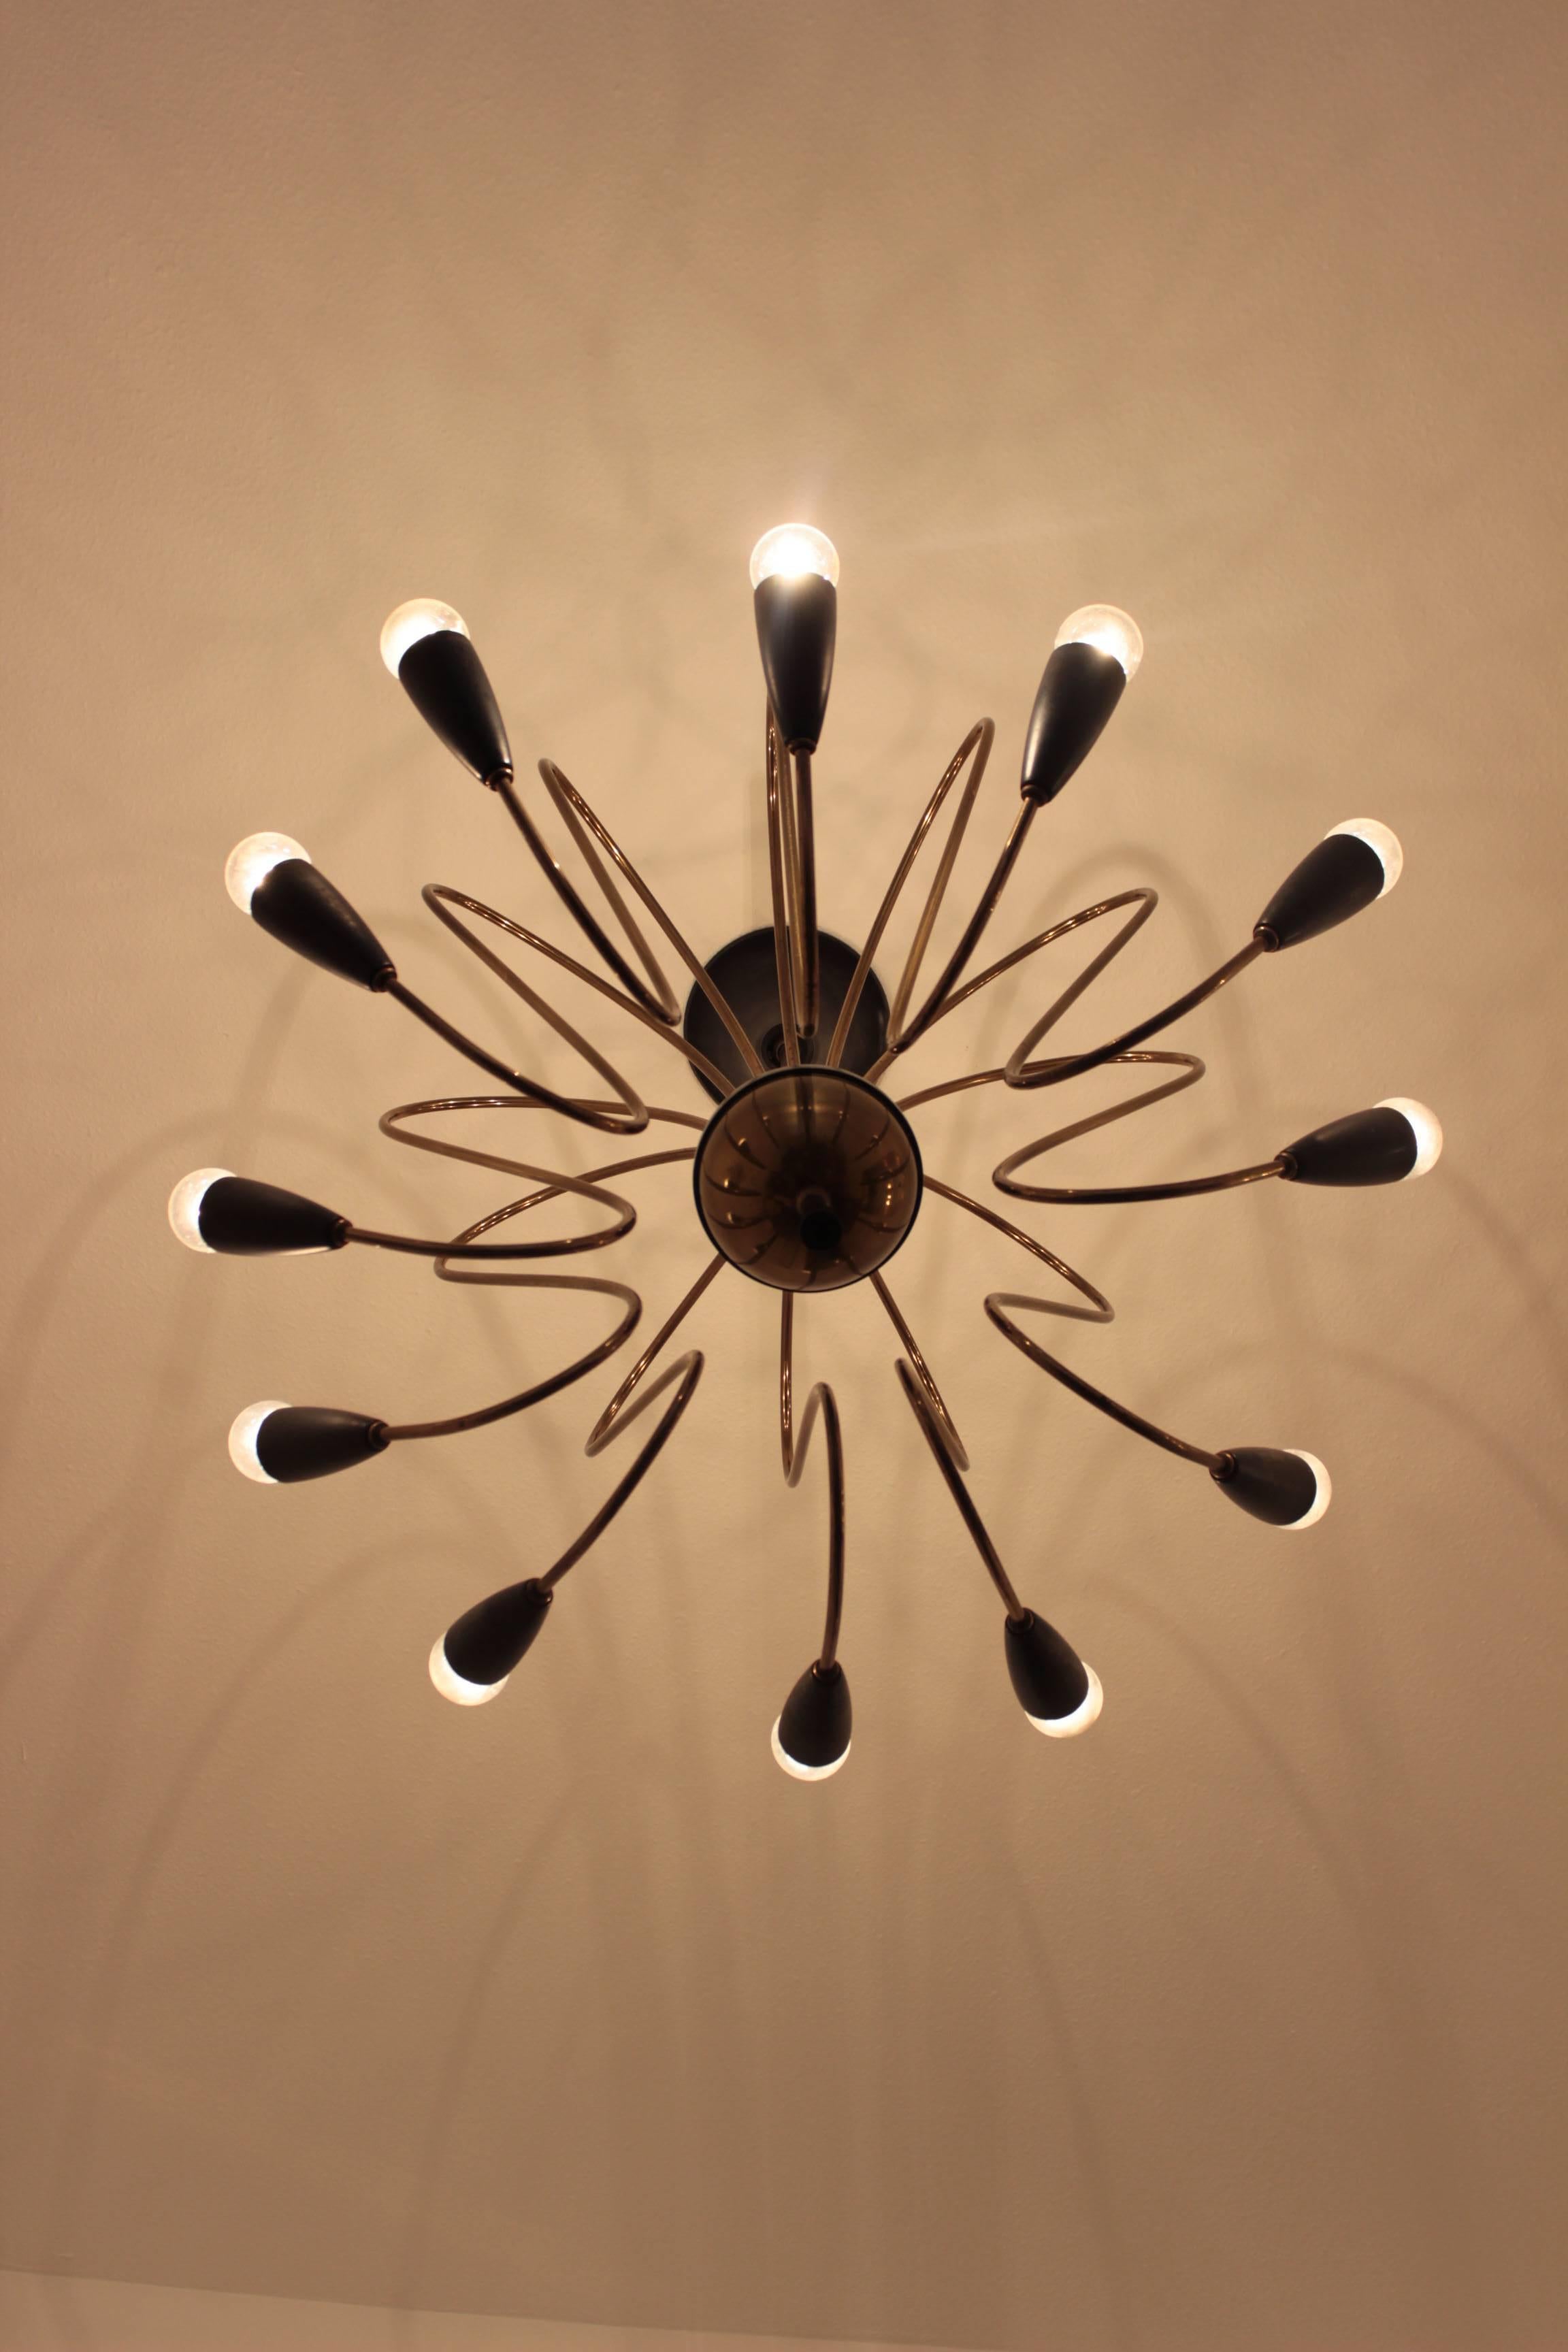 This exceptional chandelier has 12 brass arms and black enamel sockets, the arms come together in a nice round brass body, as u see the chandelier is truly an eyecatcher.